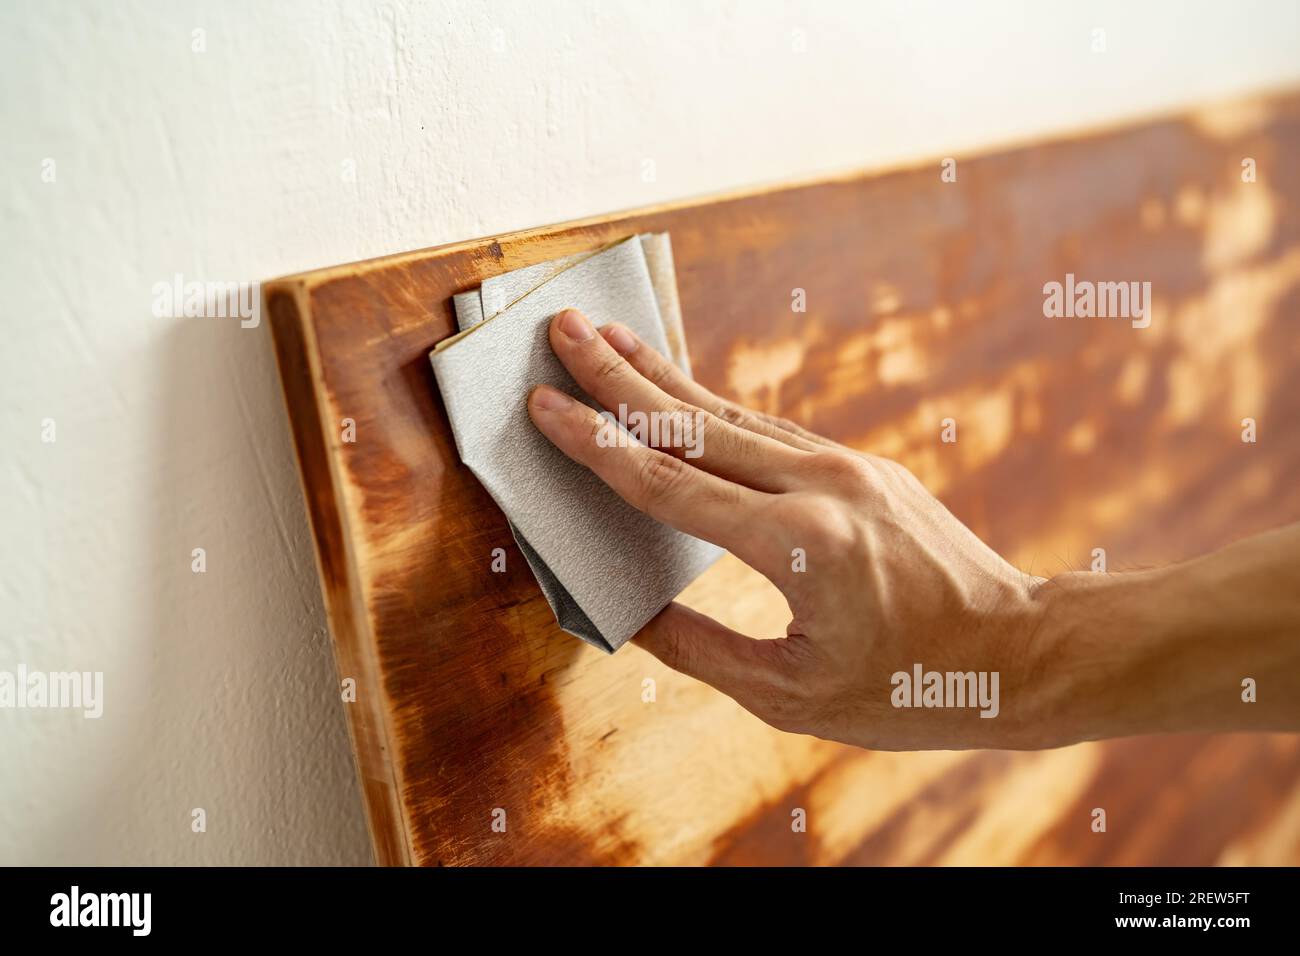 Scrubbing wood panel with sandpaper Stock Photo